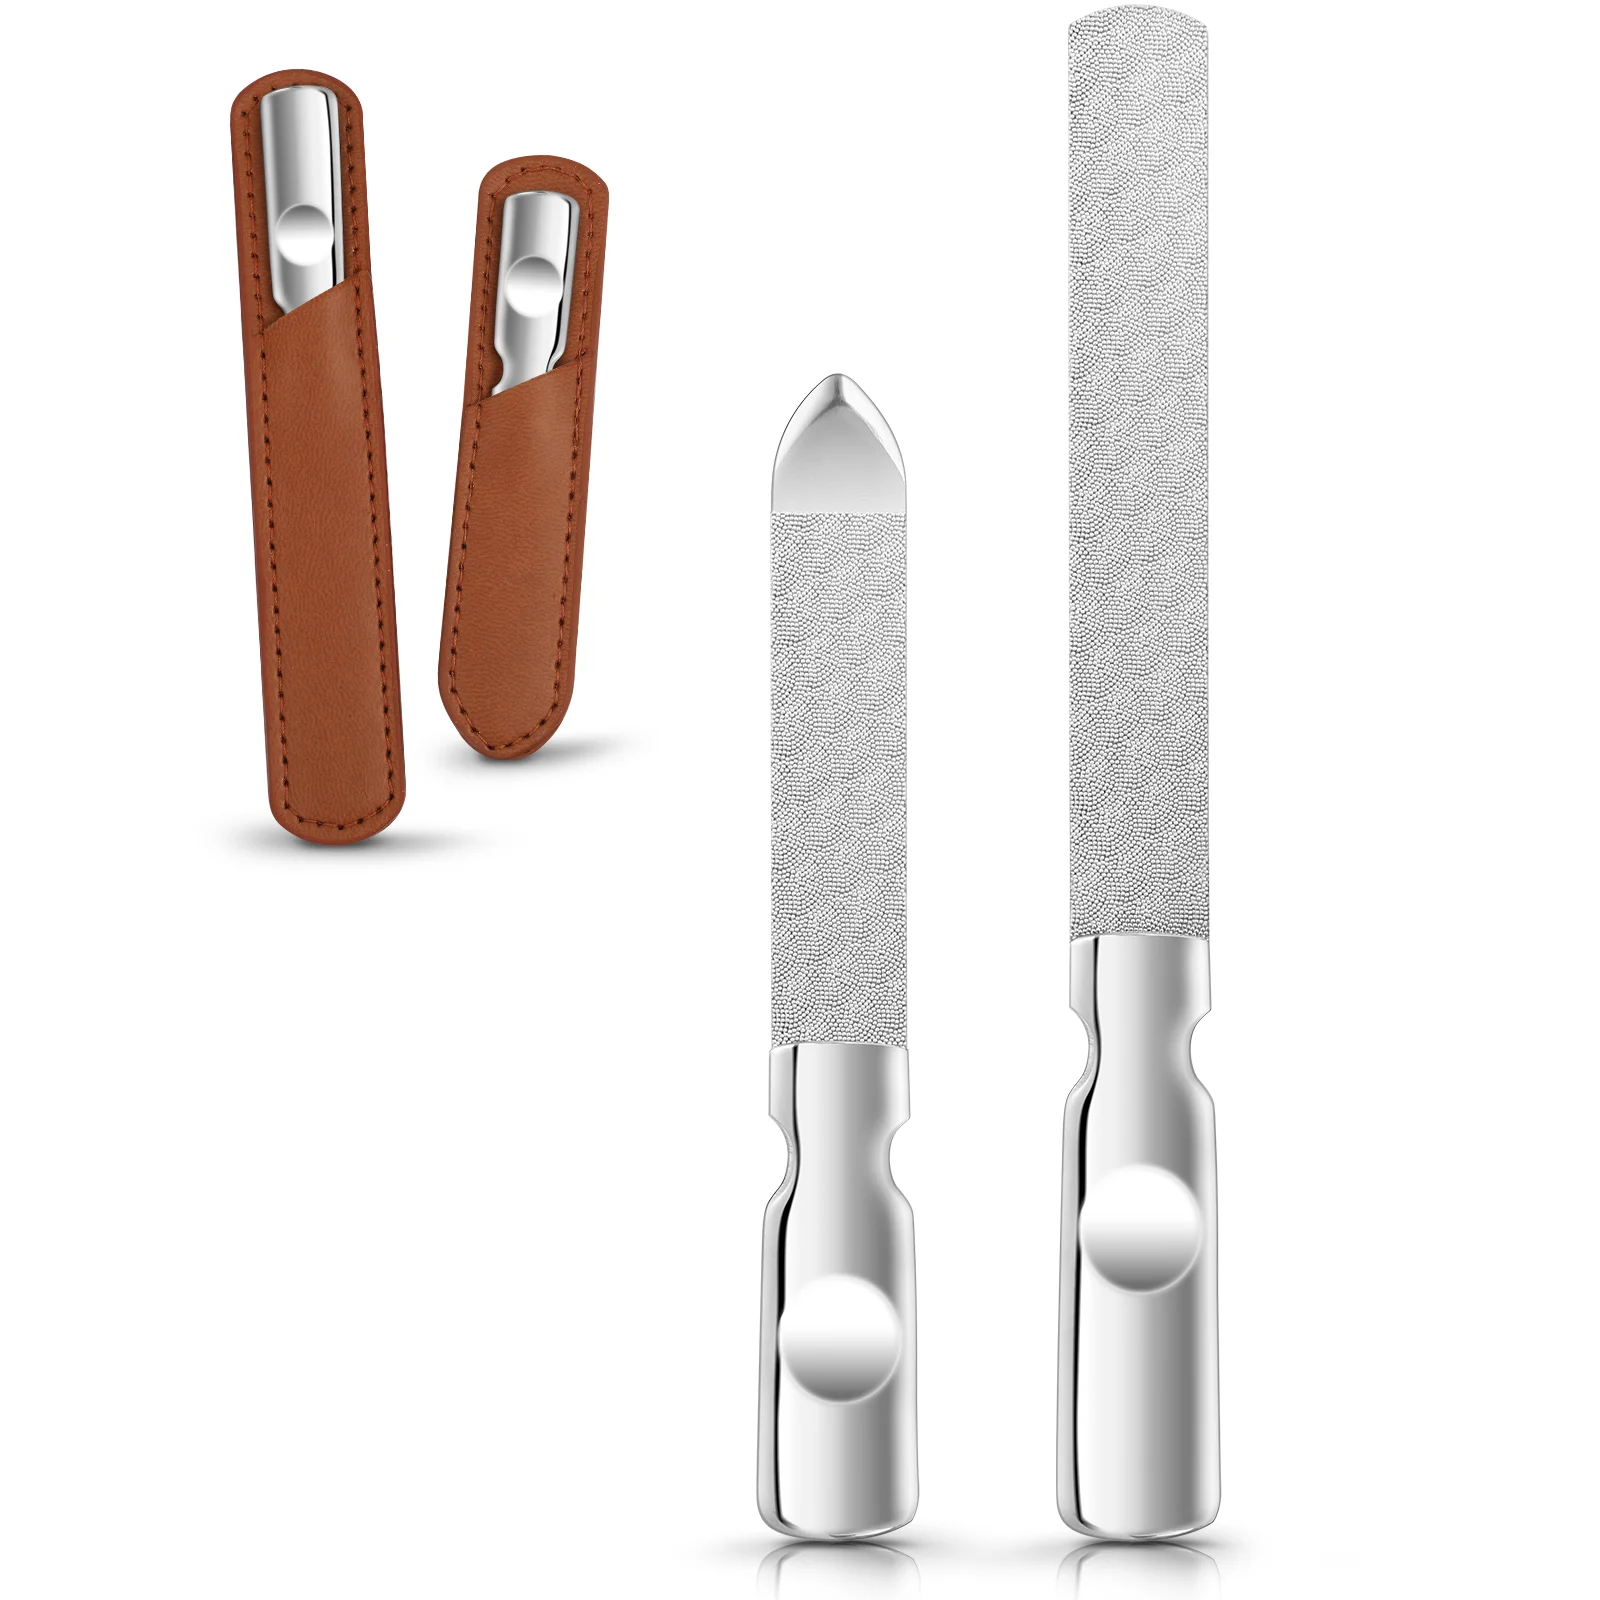 2Pcs Stainless Steel Nail File Double Sided Nail File Manicure Pedicure Tools with Leather Case for Men Women